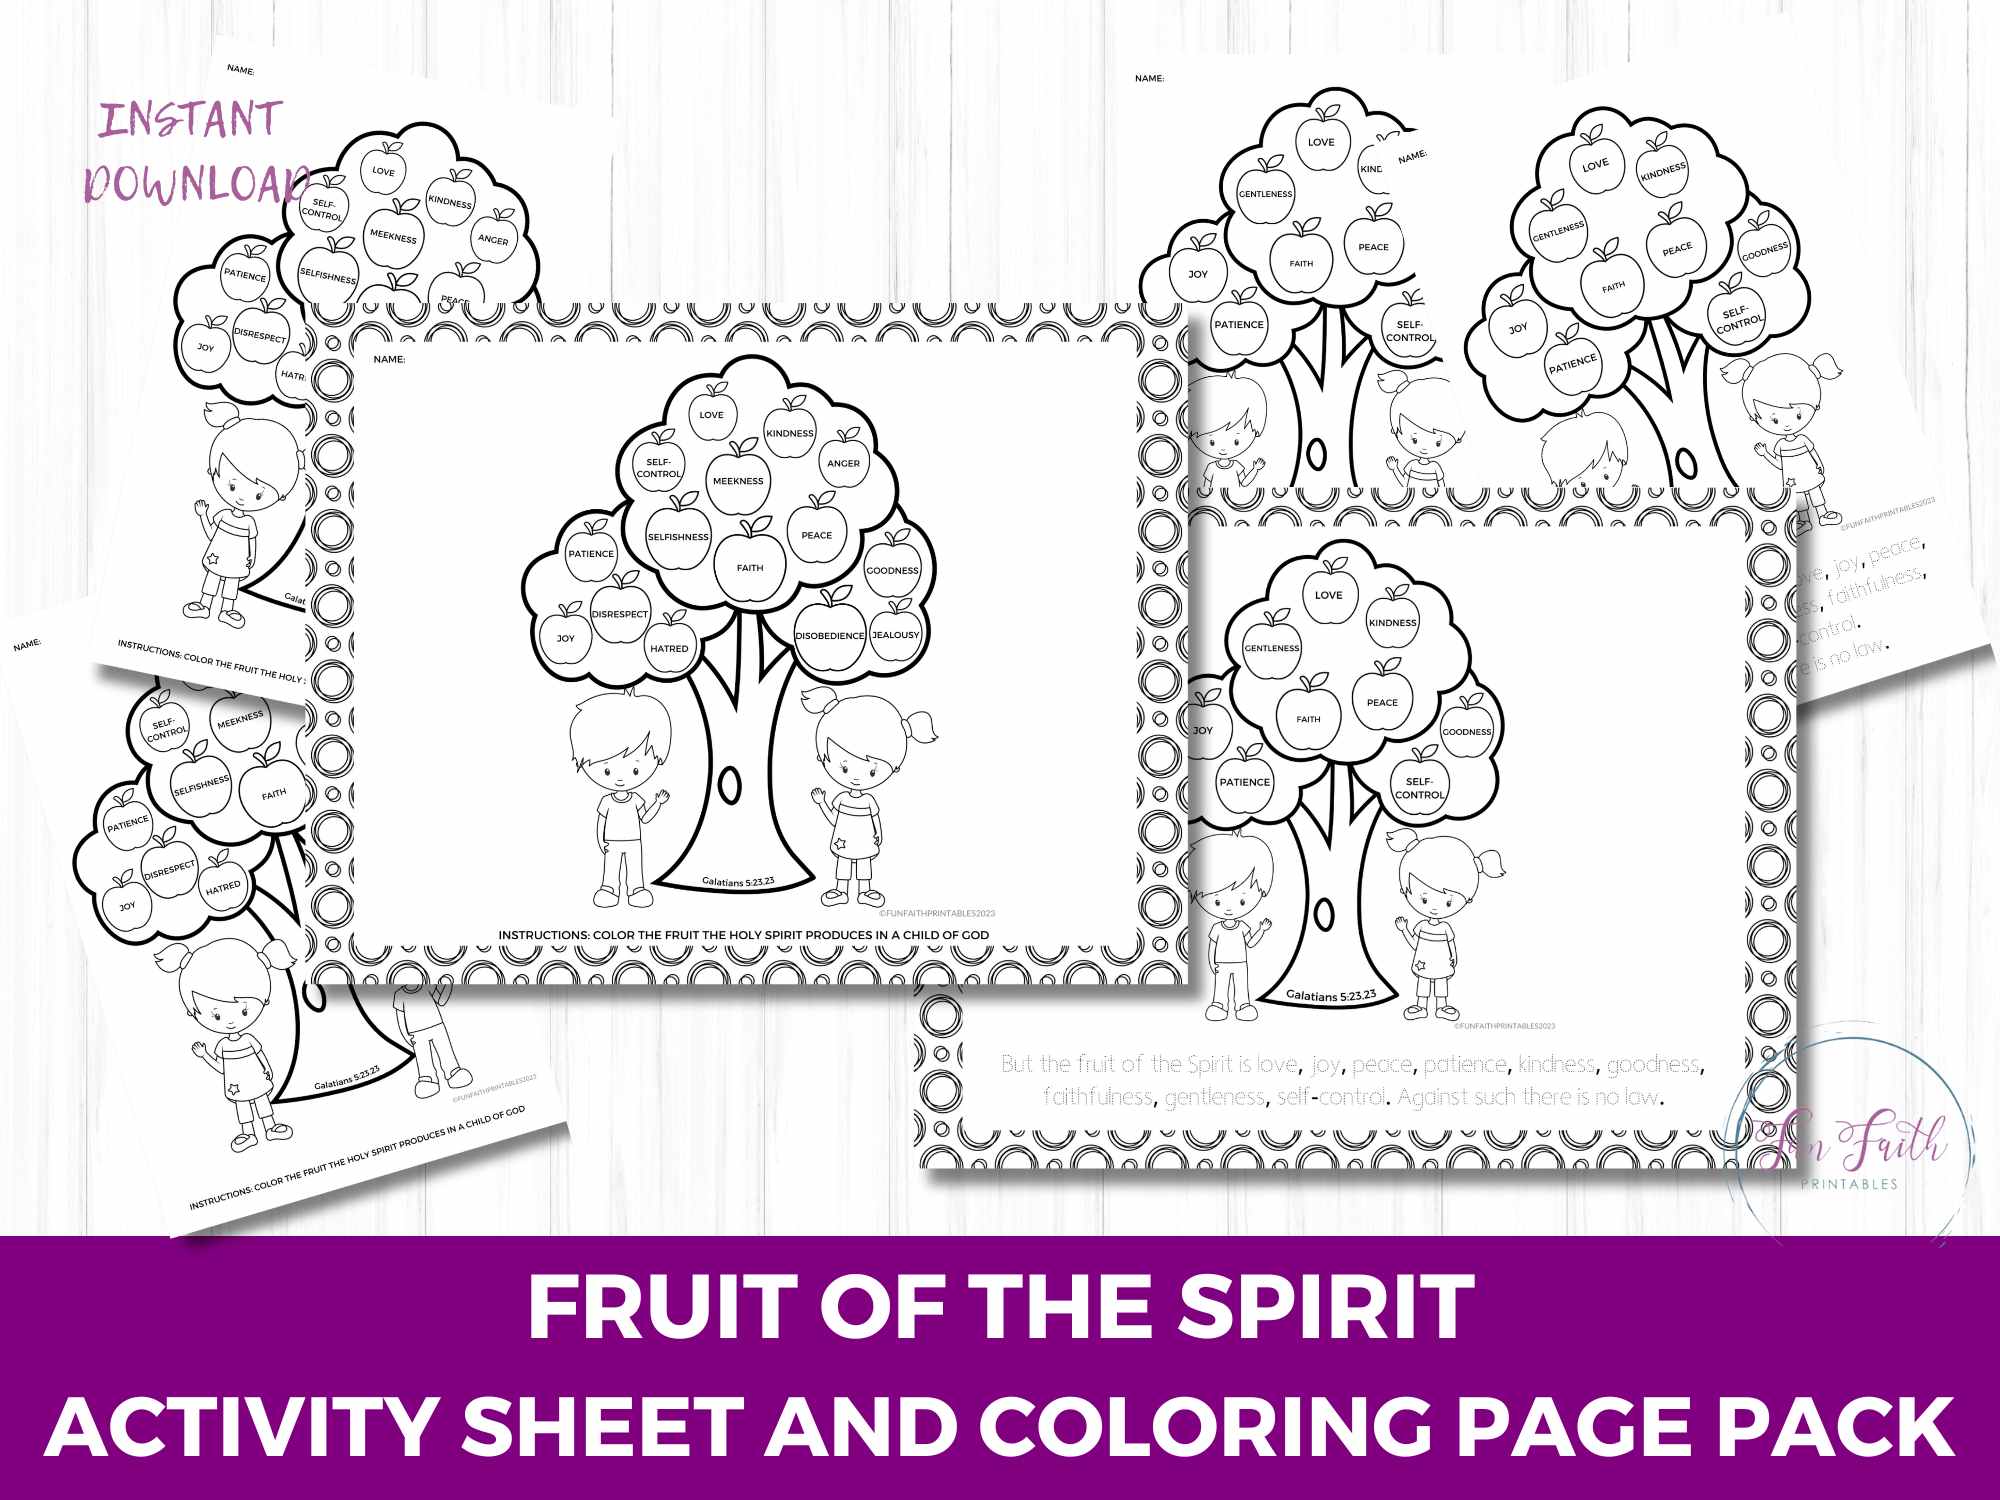 Etsy -Fruit of the Spirit Coloring Pages and Activity Sheets